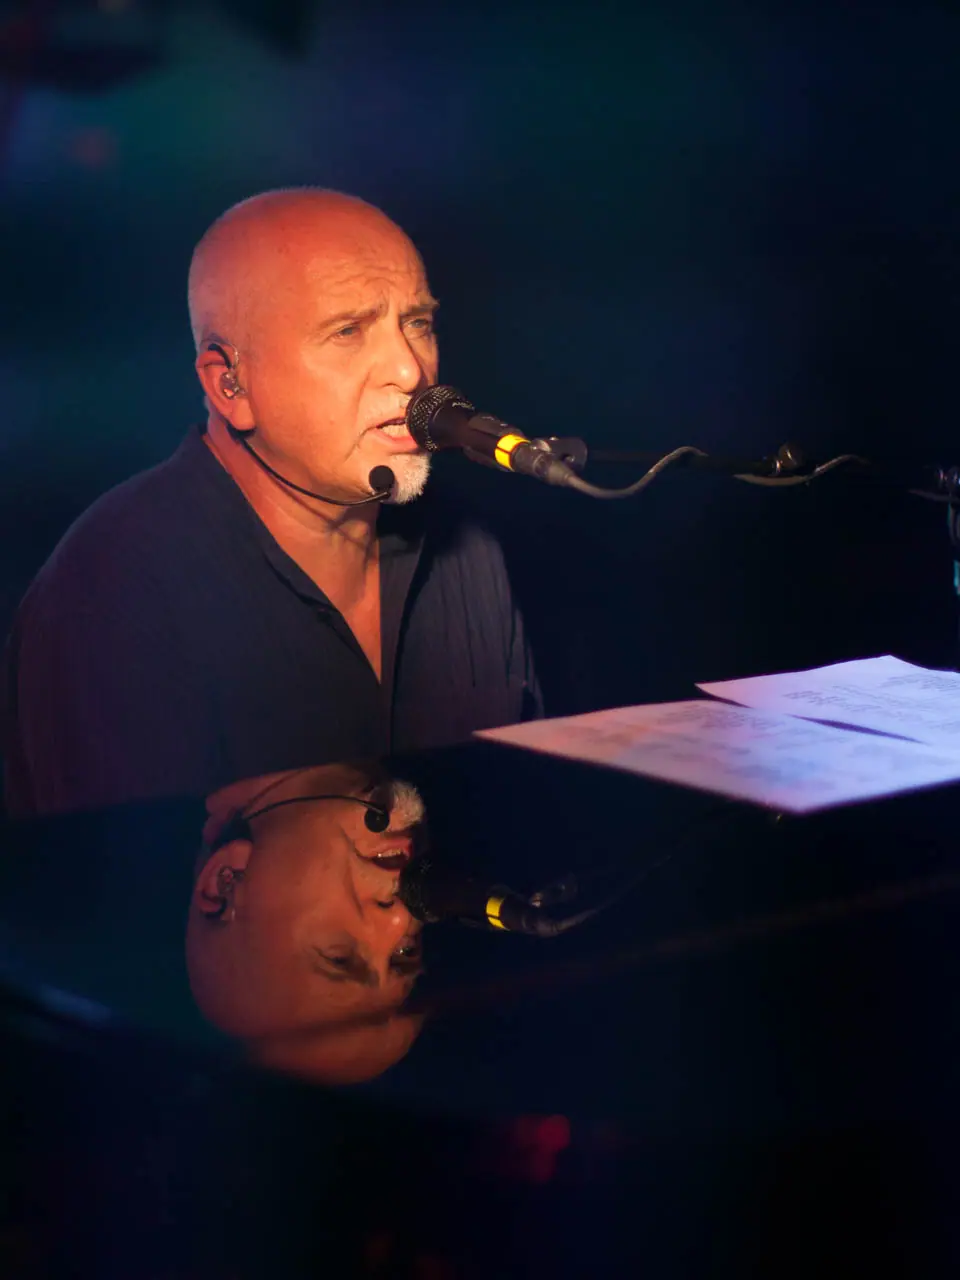 Peter Gabriel's i/o is finally announced for December release date